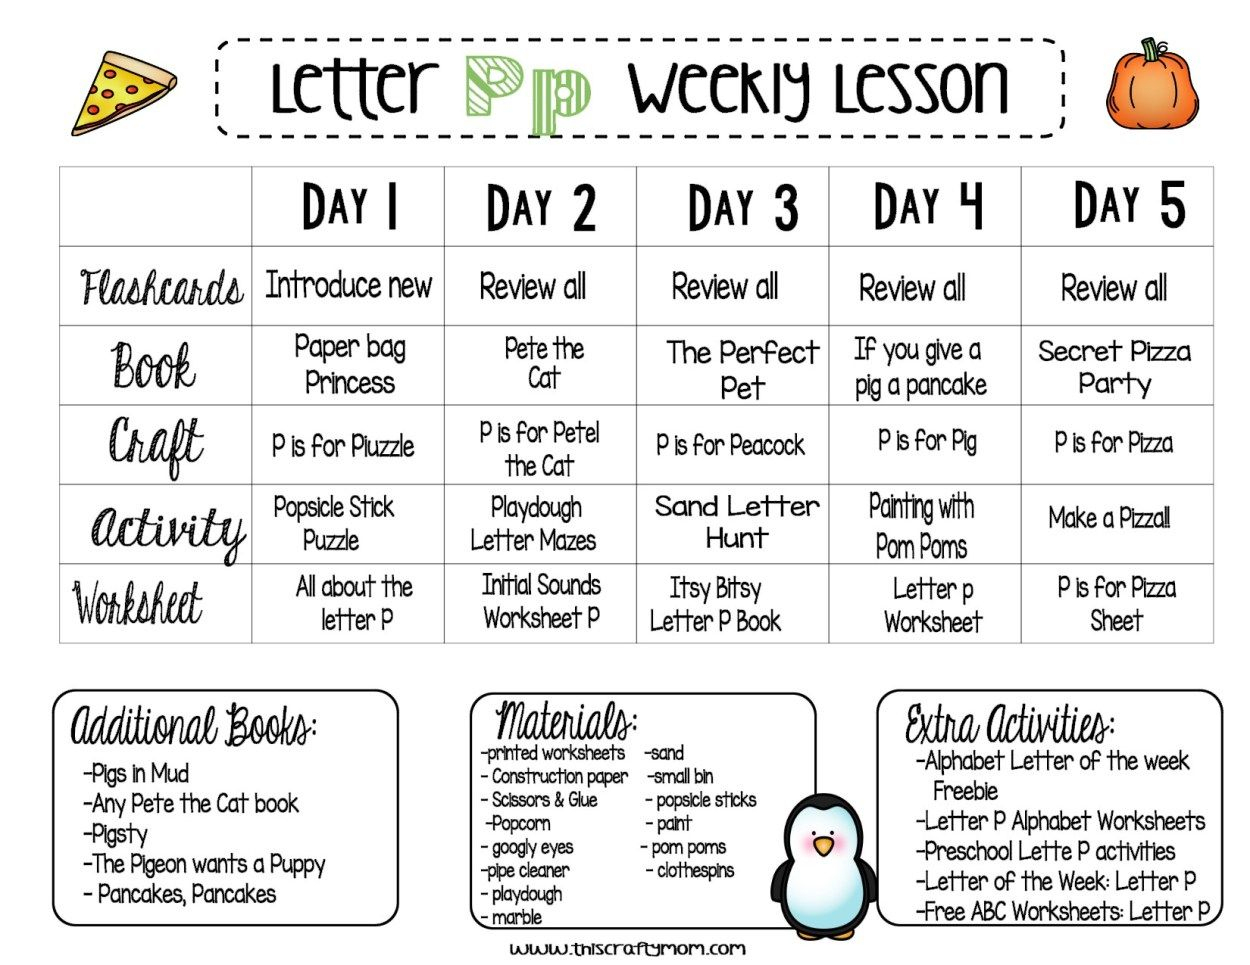 Free Preschool Letter P Weekly Lesson Plan - Letter Of The